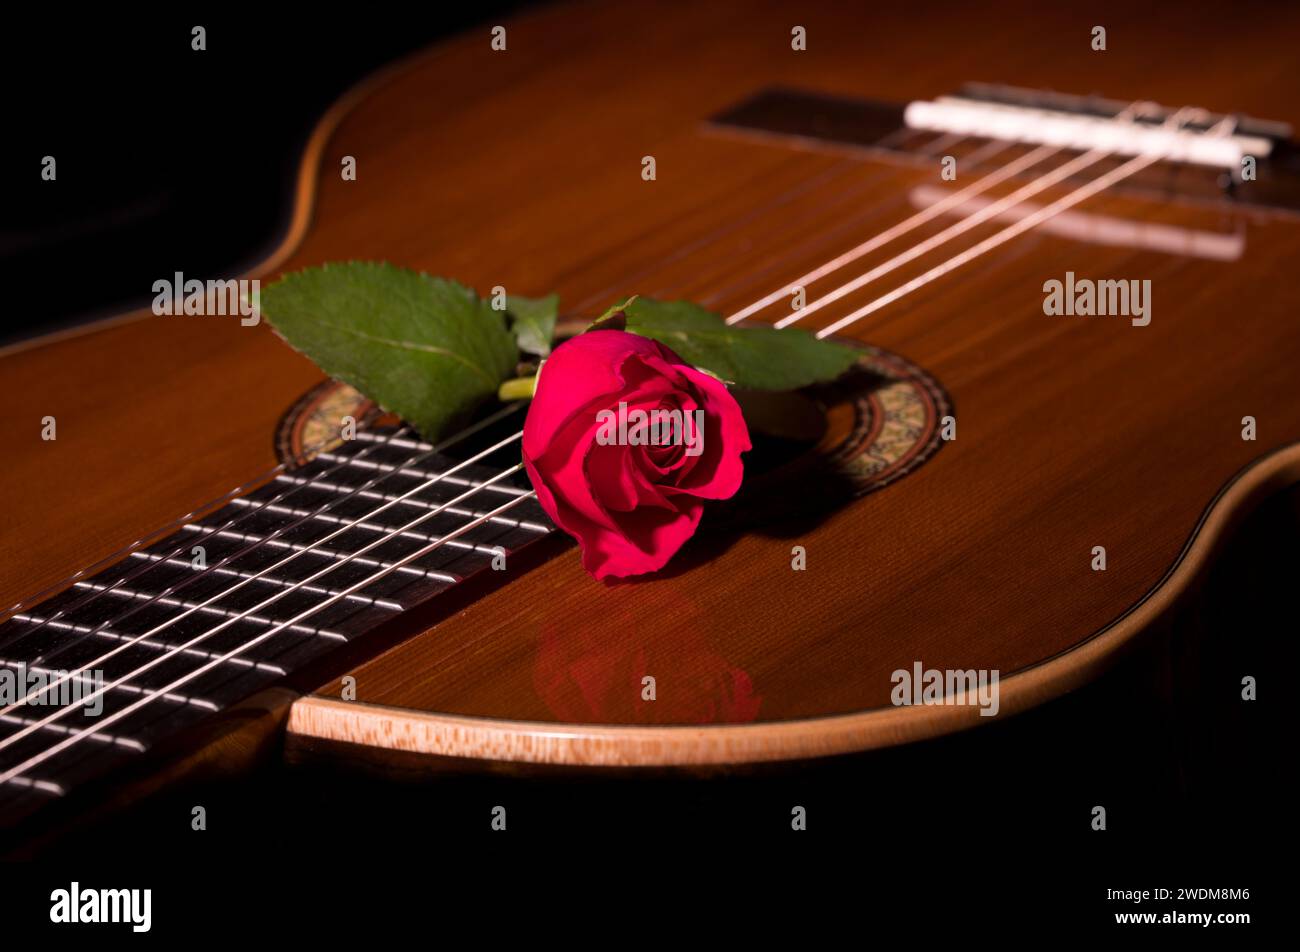 Red Rose on Classical Guitar Stock Photo